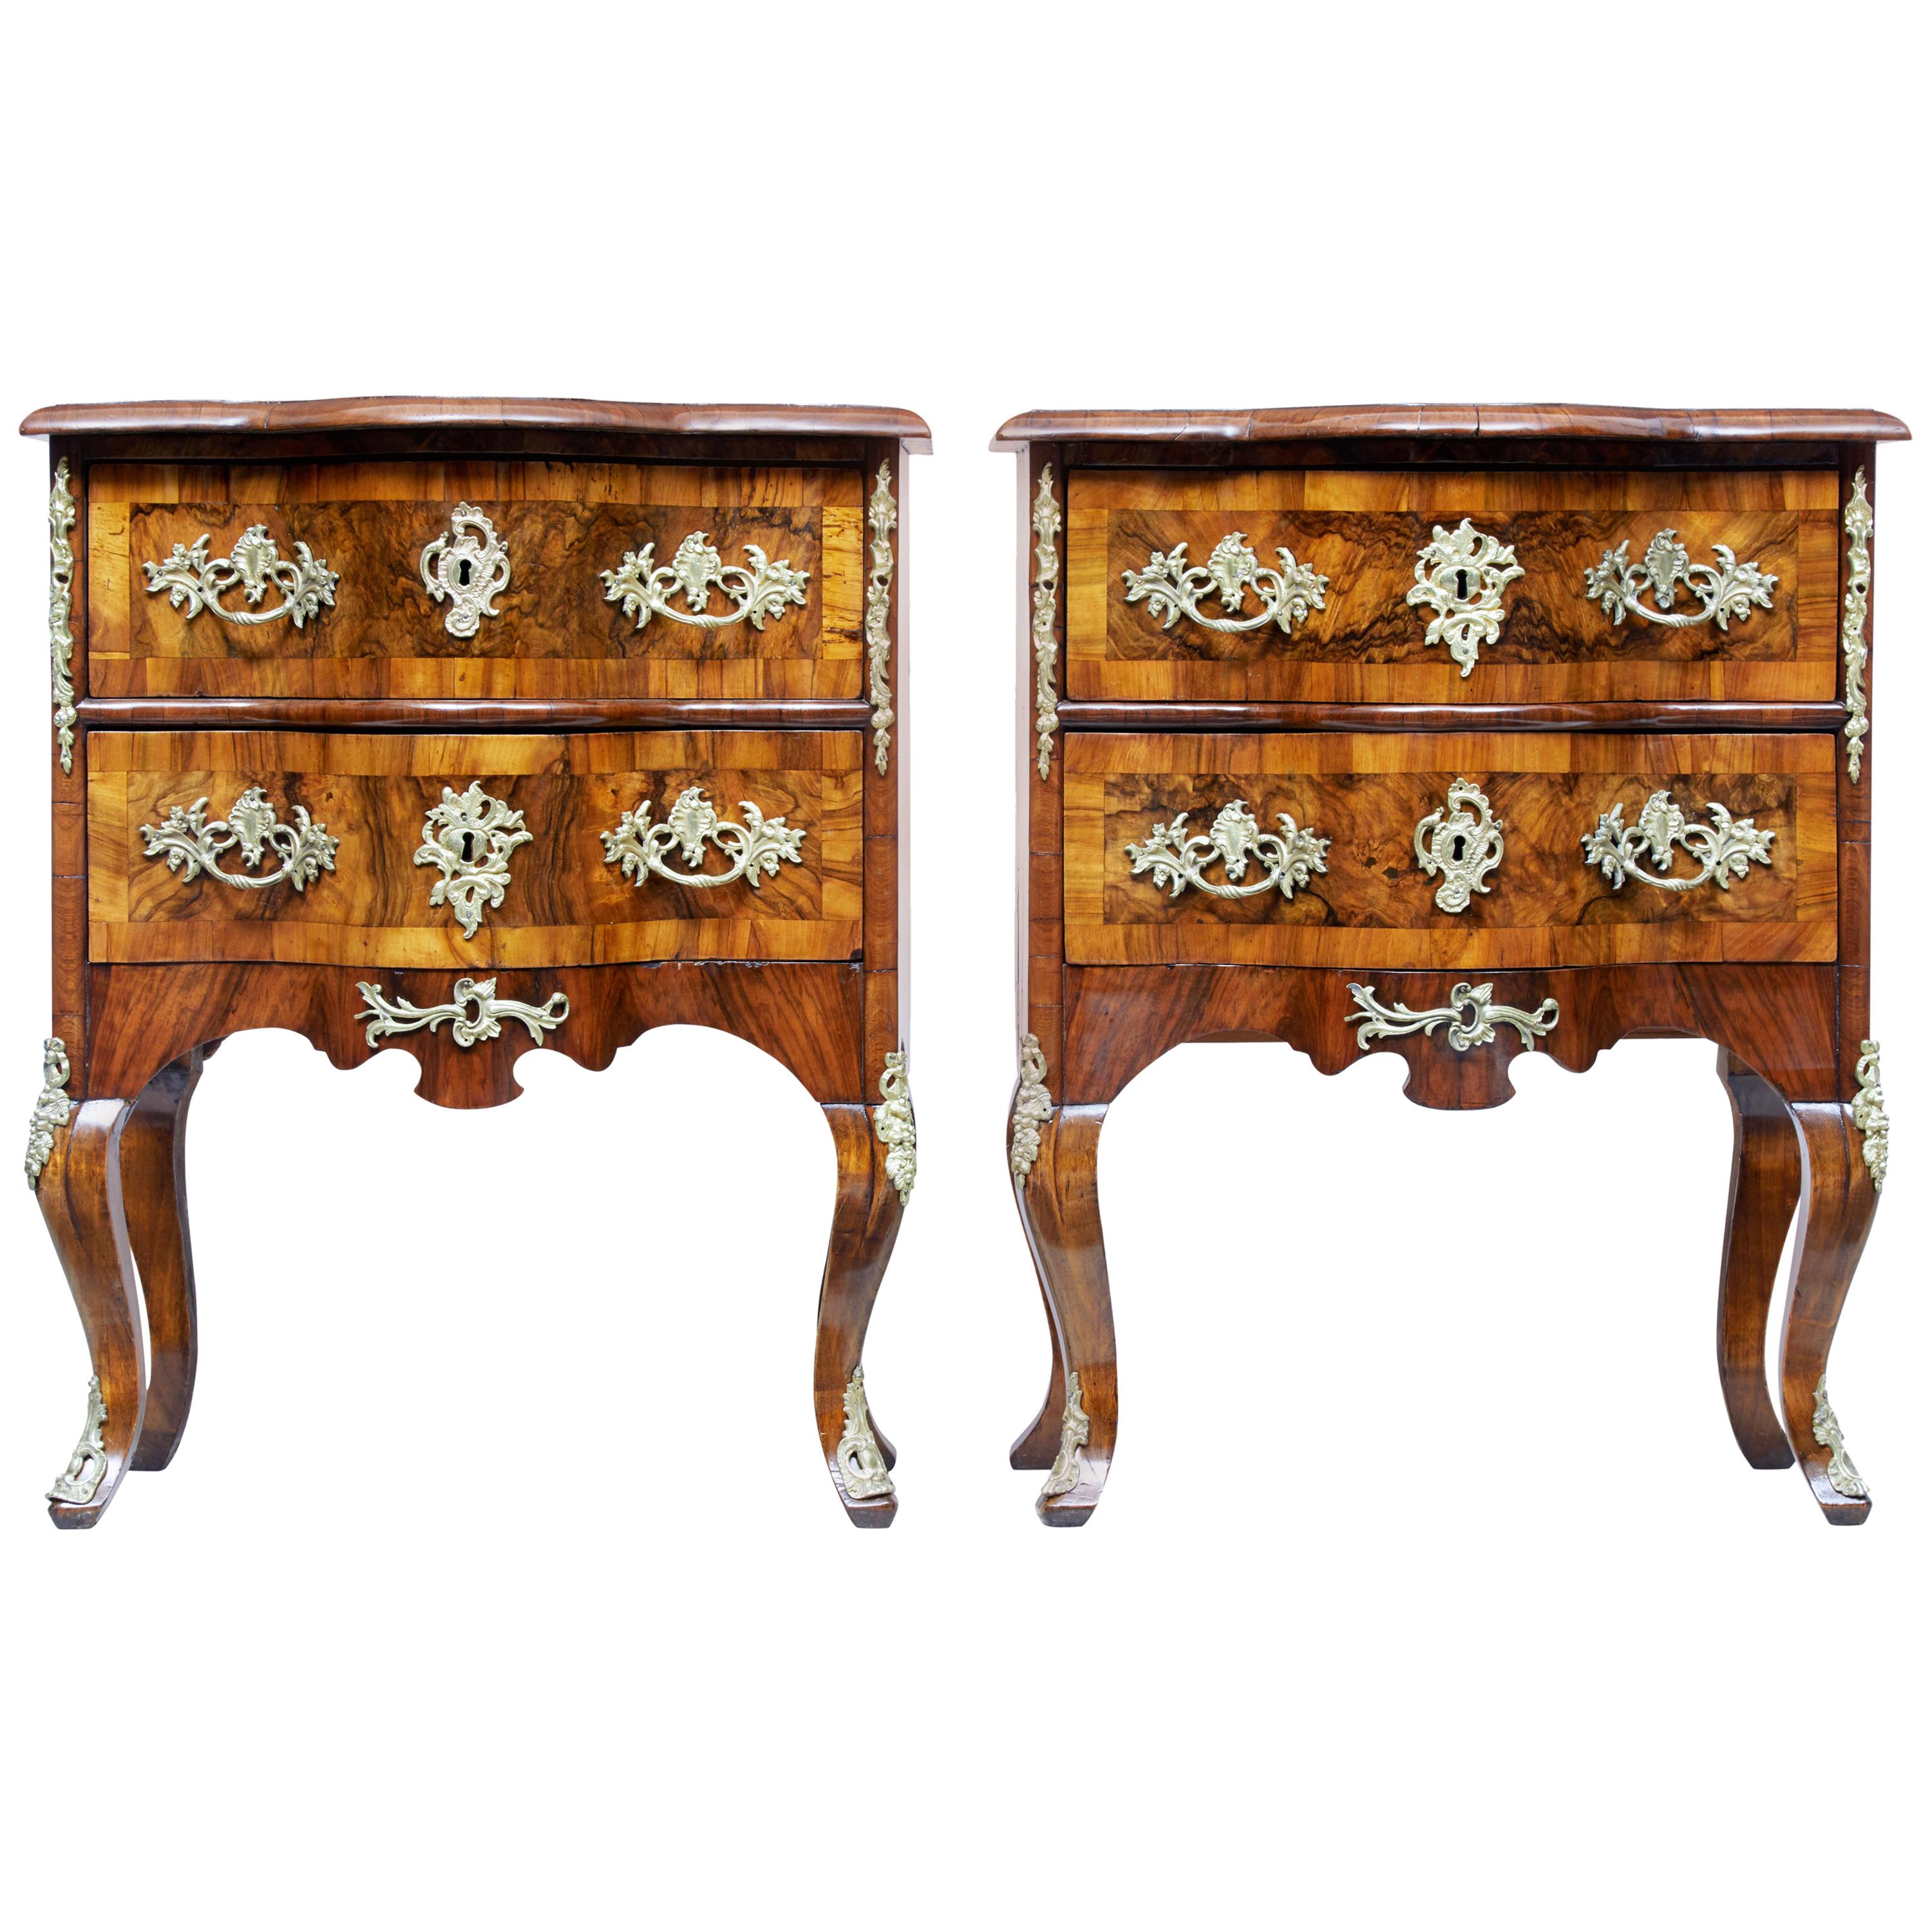 Pair of Small Mid-19th Century Continental Walnut Commodes